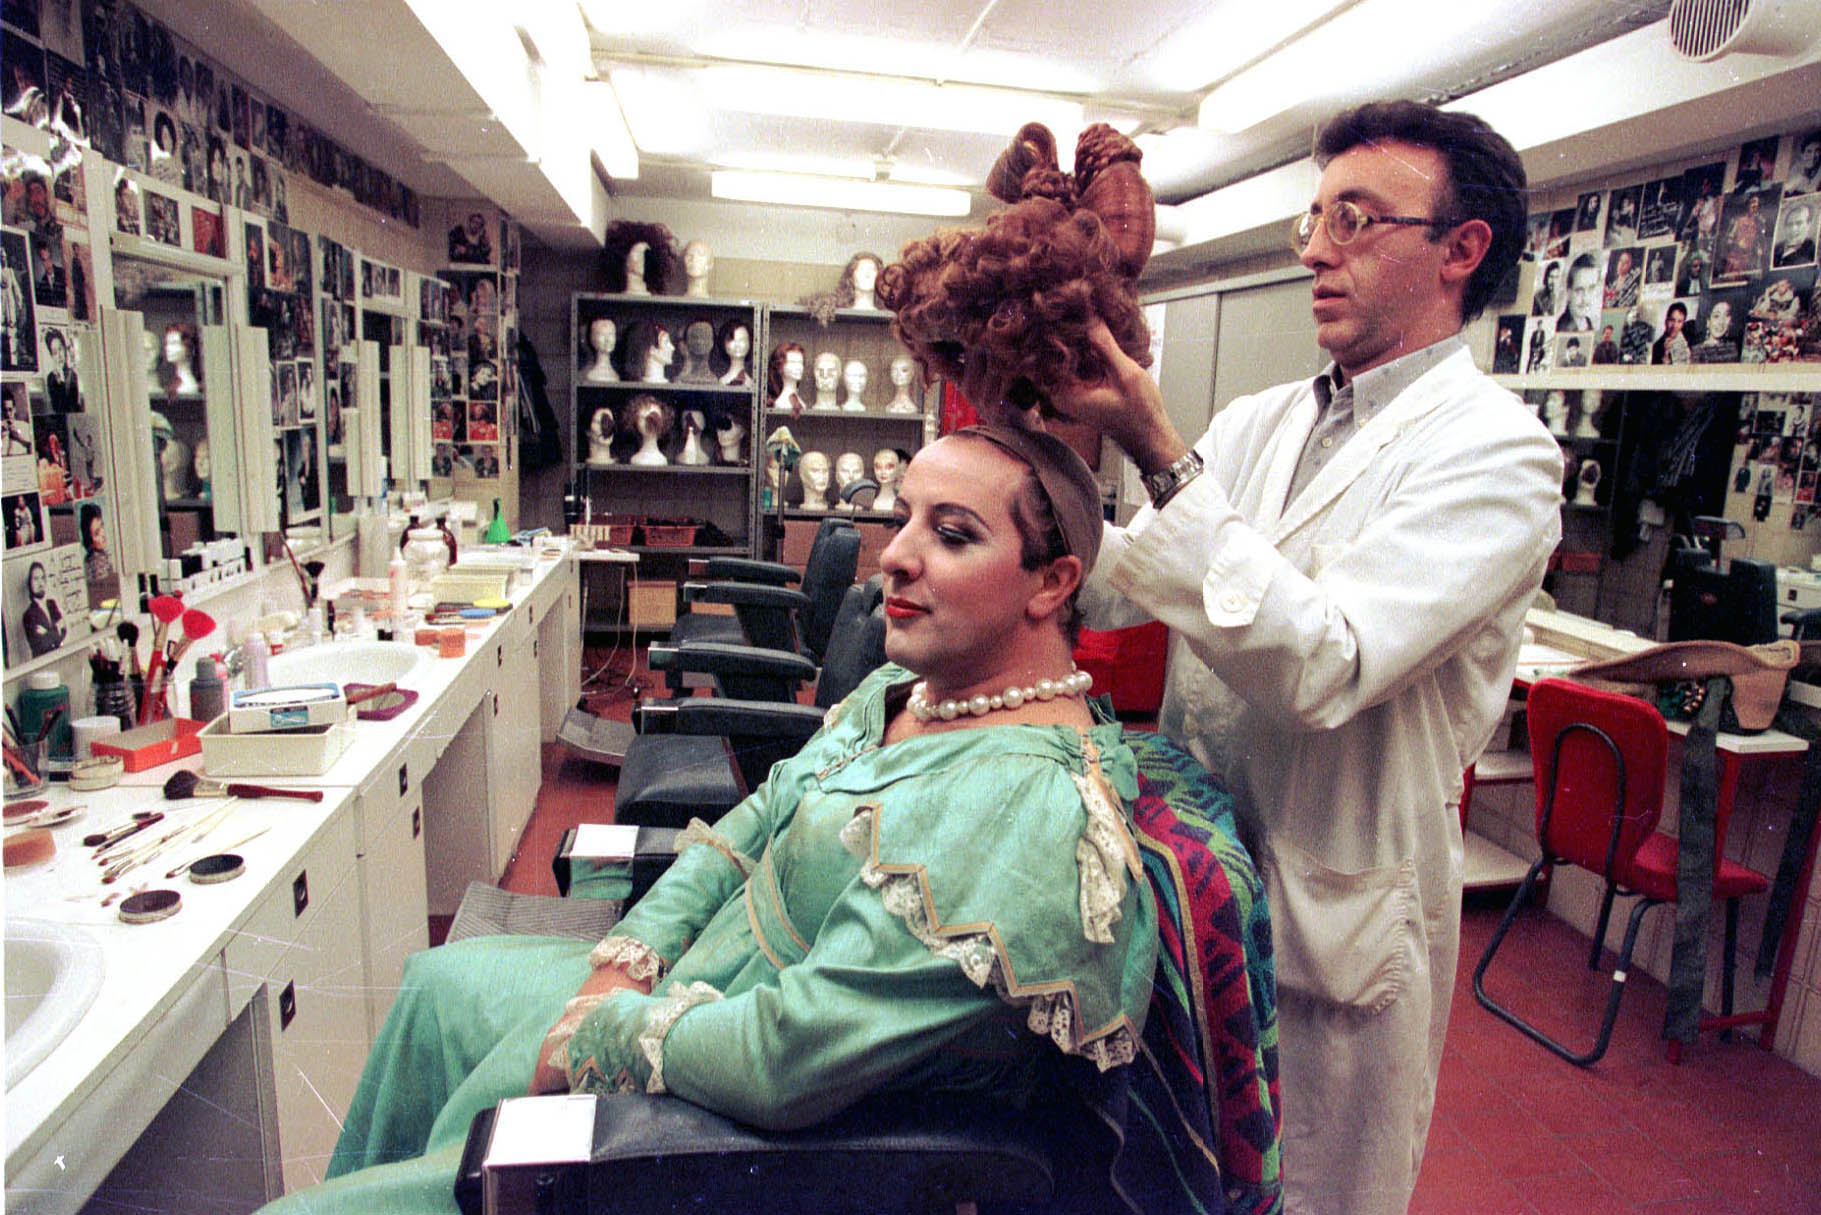 The preparation of the character in the make-up room